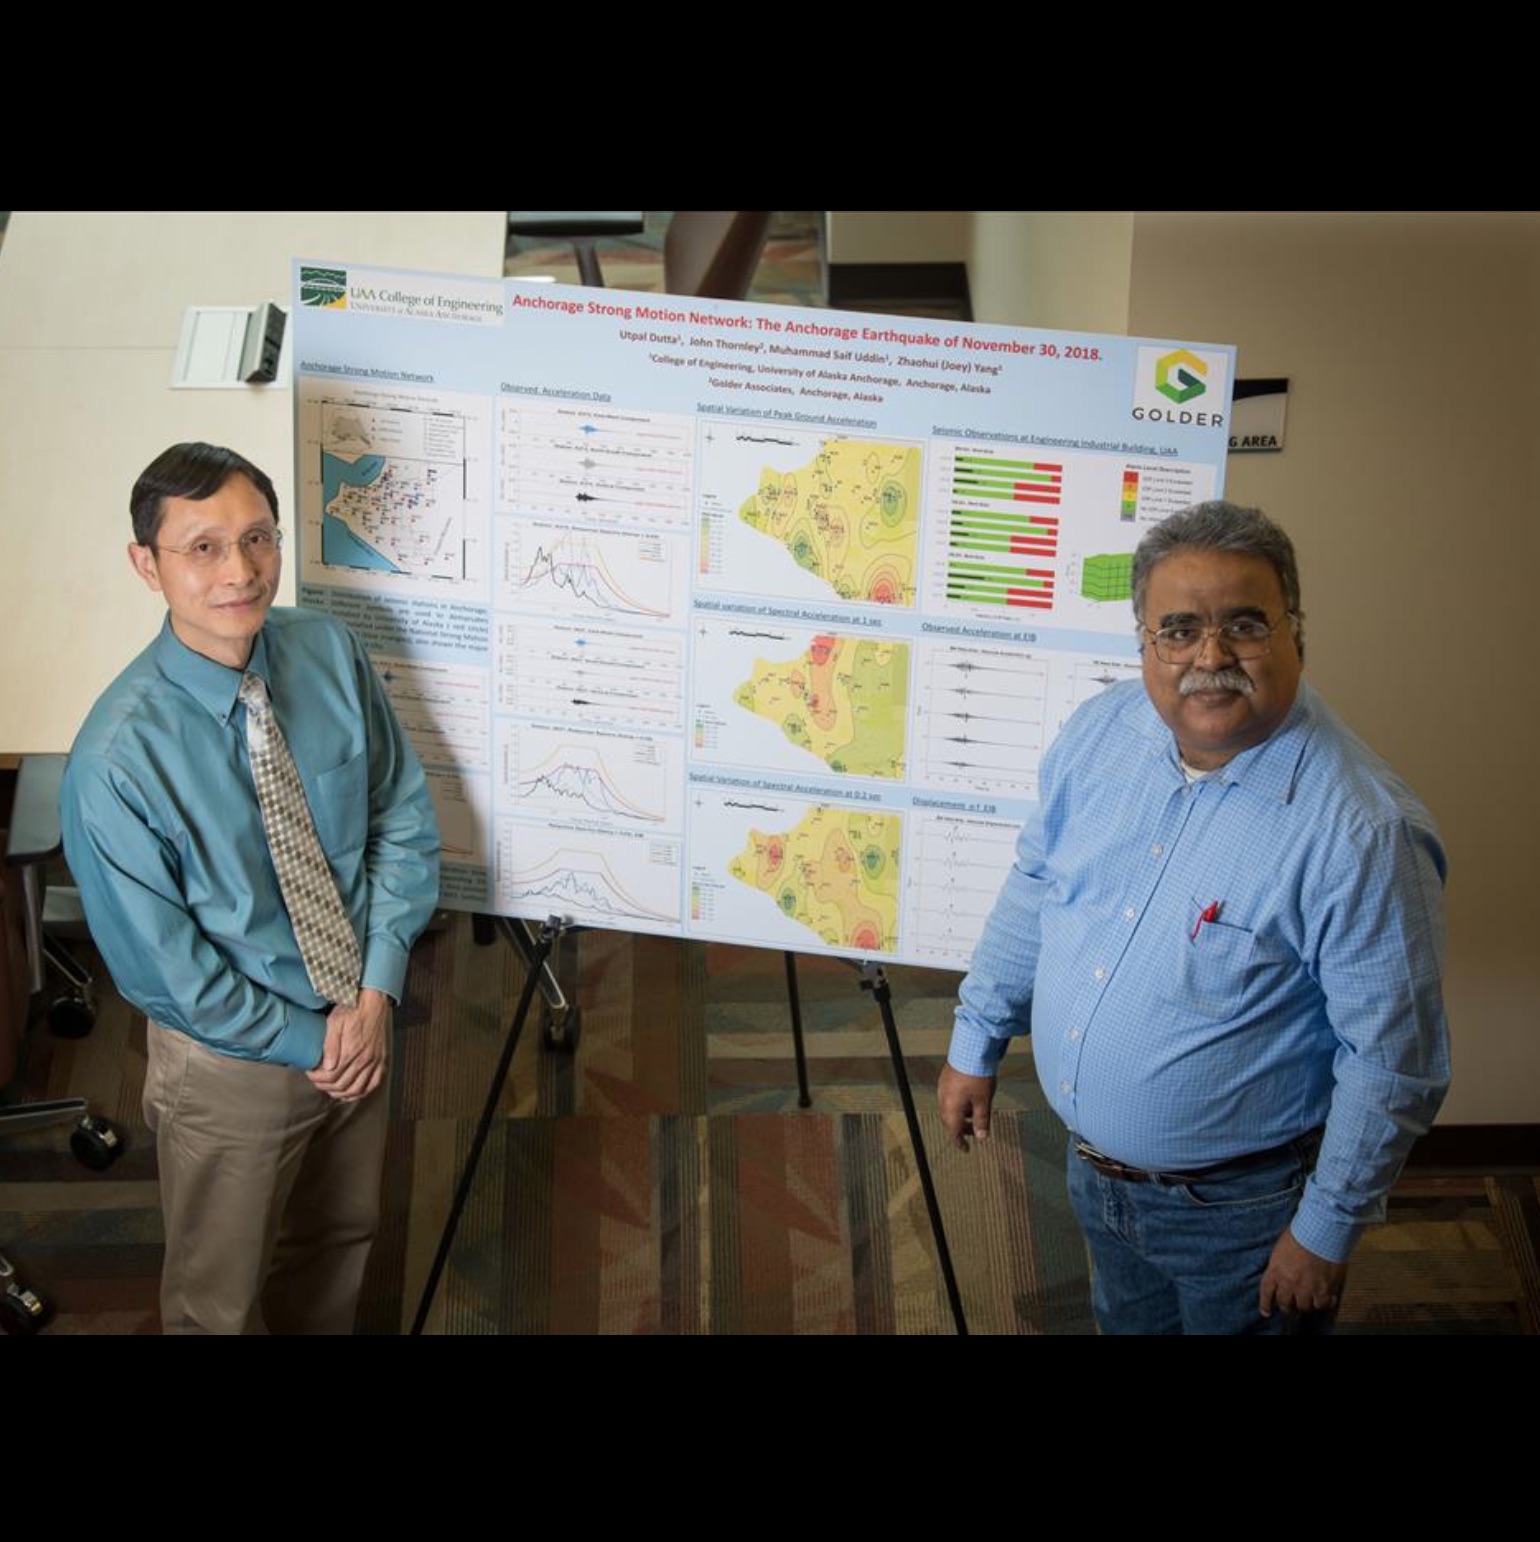 professors Joey Yang and Utpal Dutta stand before a presentation poster.